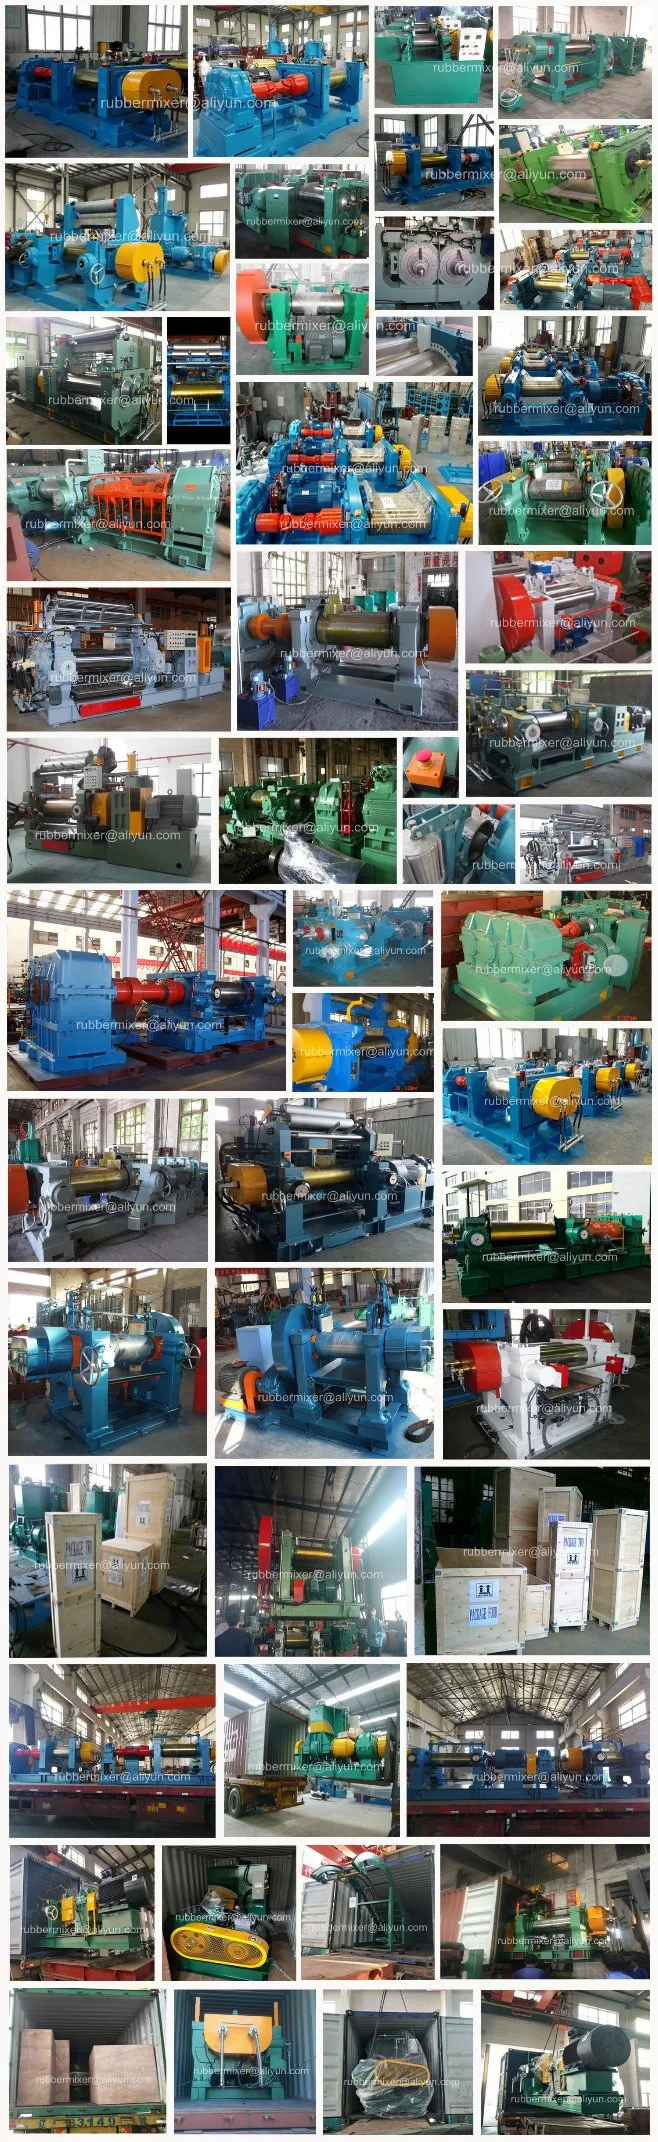 Dalian Good Quality with Stock Blender 16 Inch Xk-400 Rubber Open Two Roll Mixing Mill